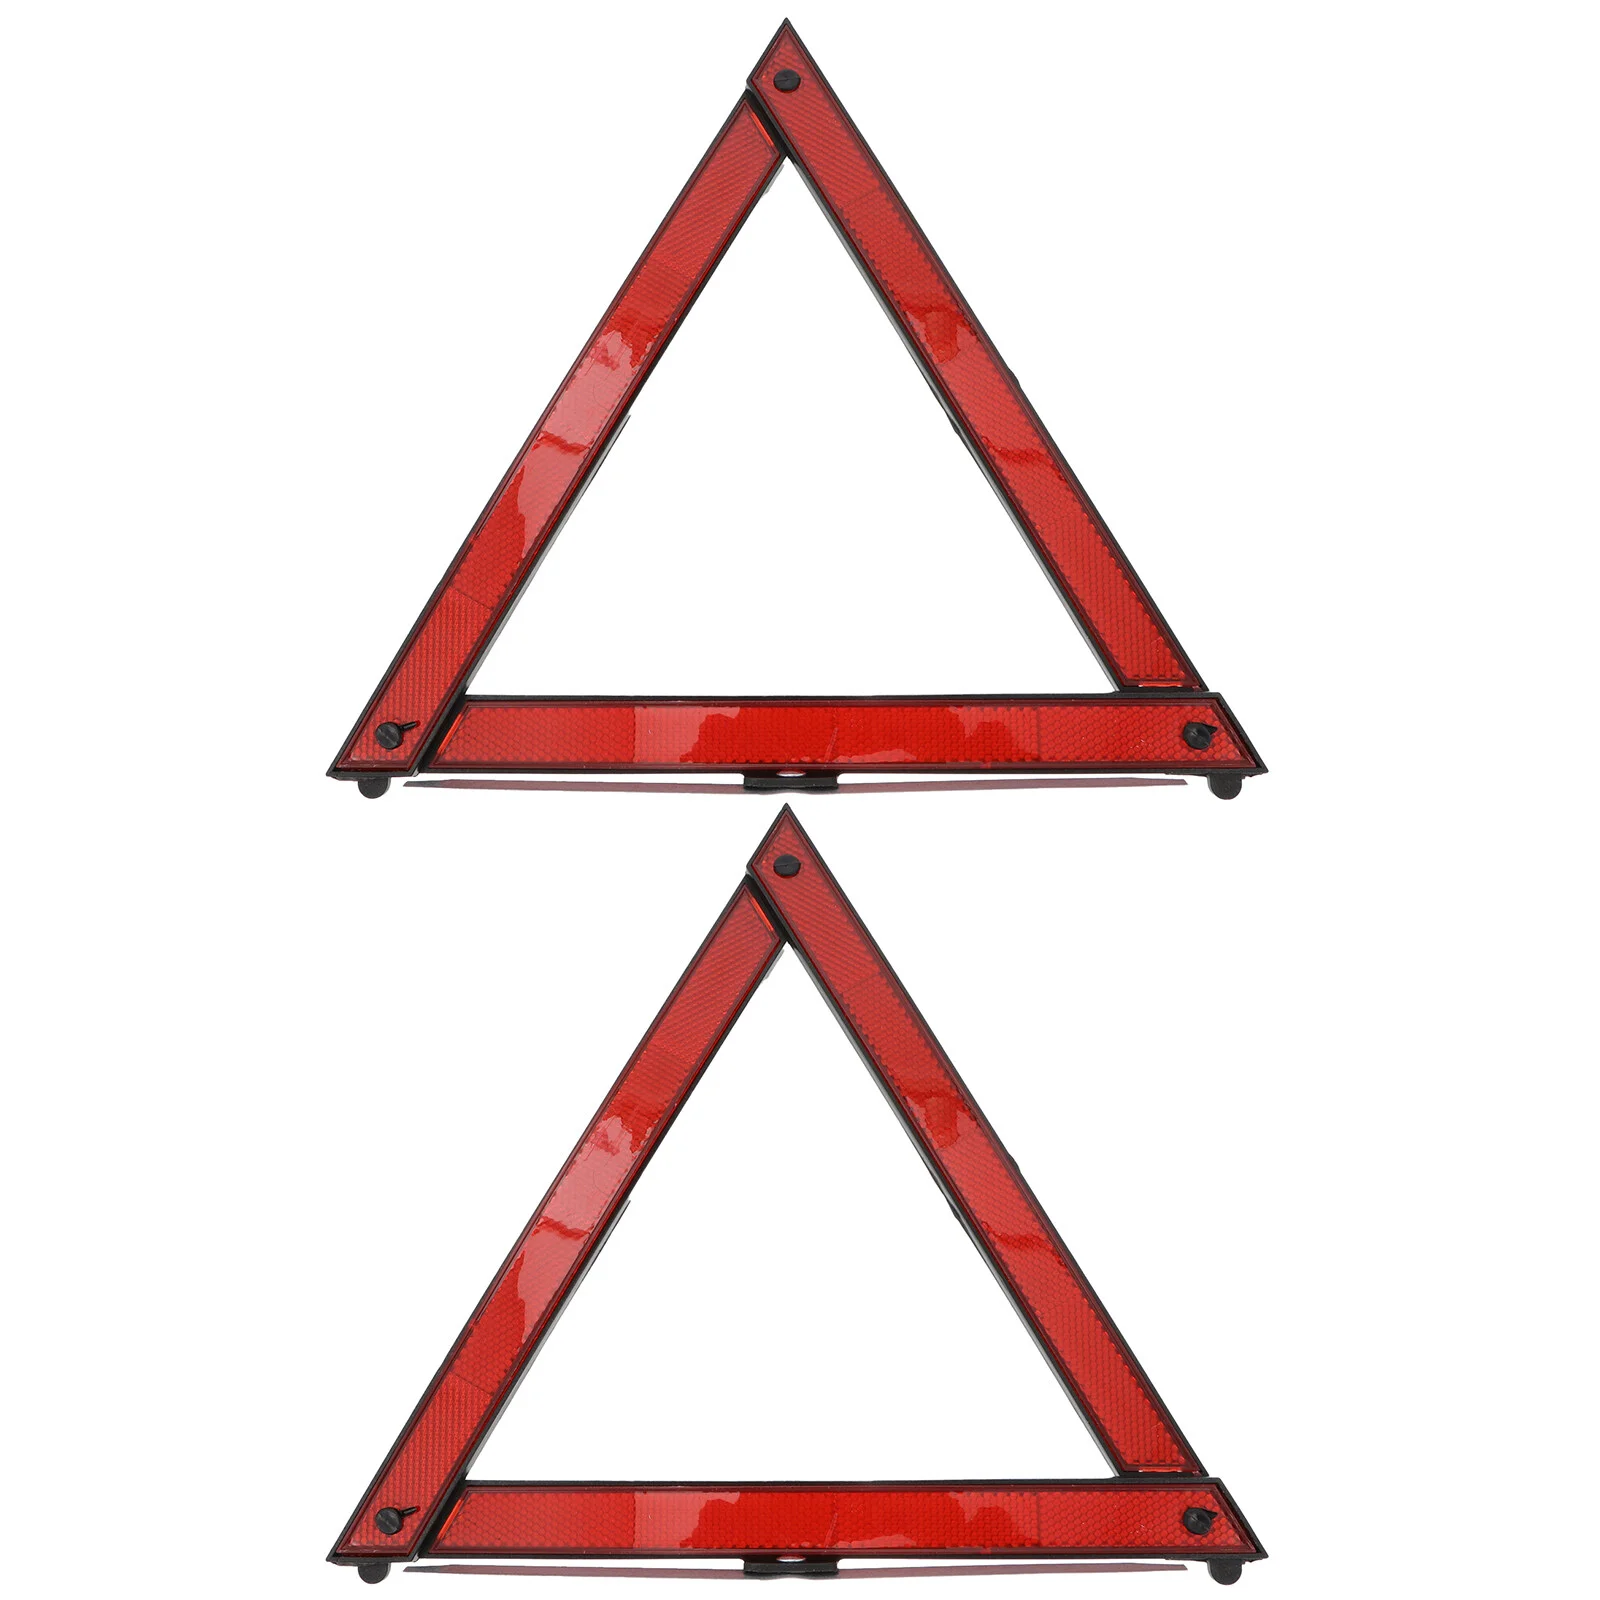 

2pcs Warning Triangle Reflective Warning Road Safety Triangle Sign Car Safety Assistance Tool ( Red )